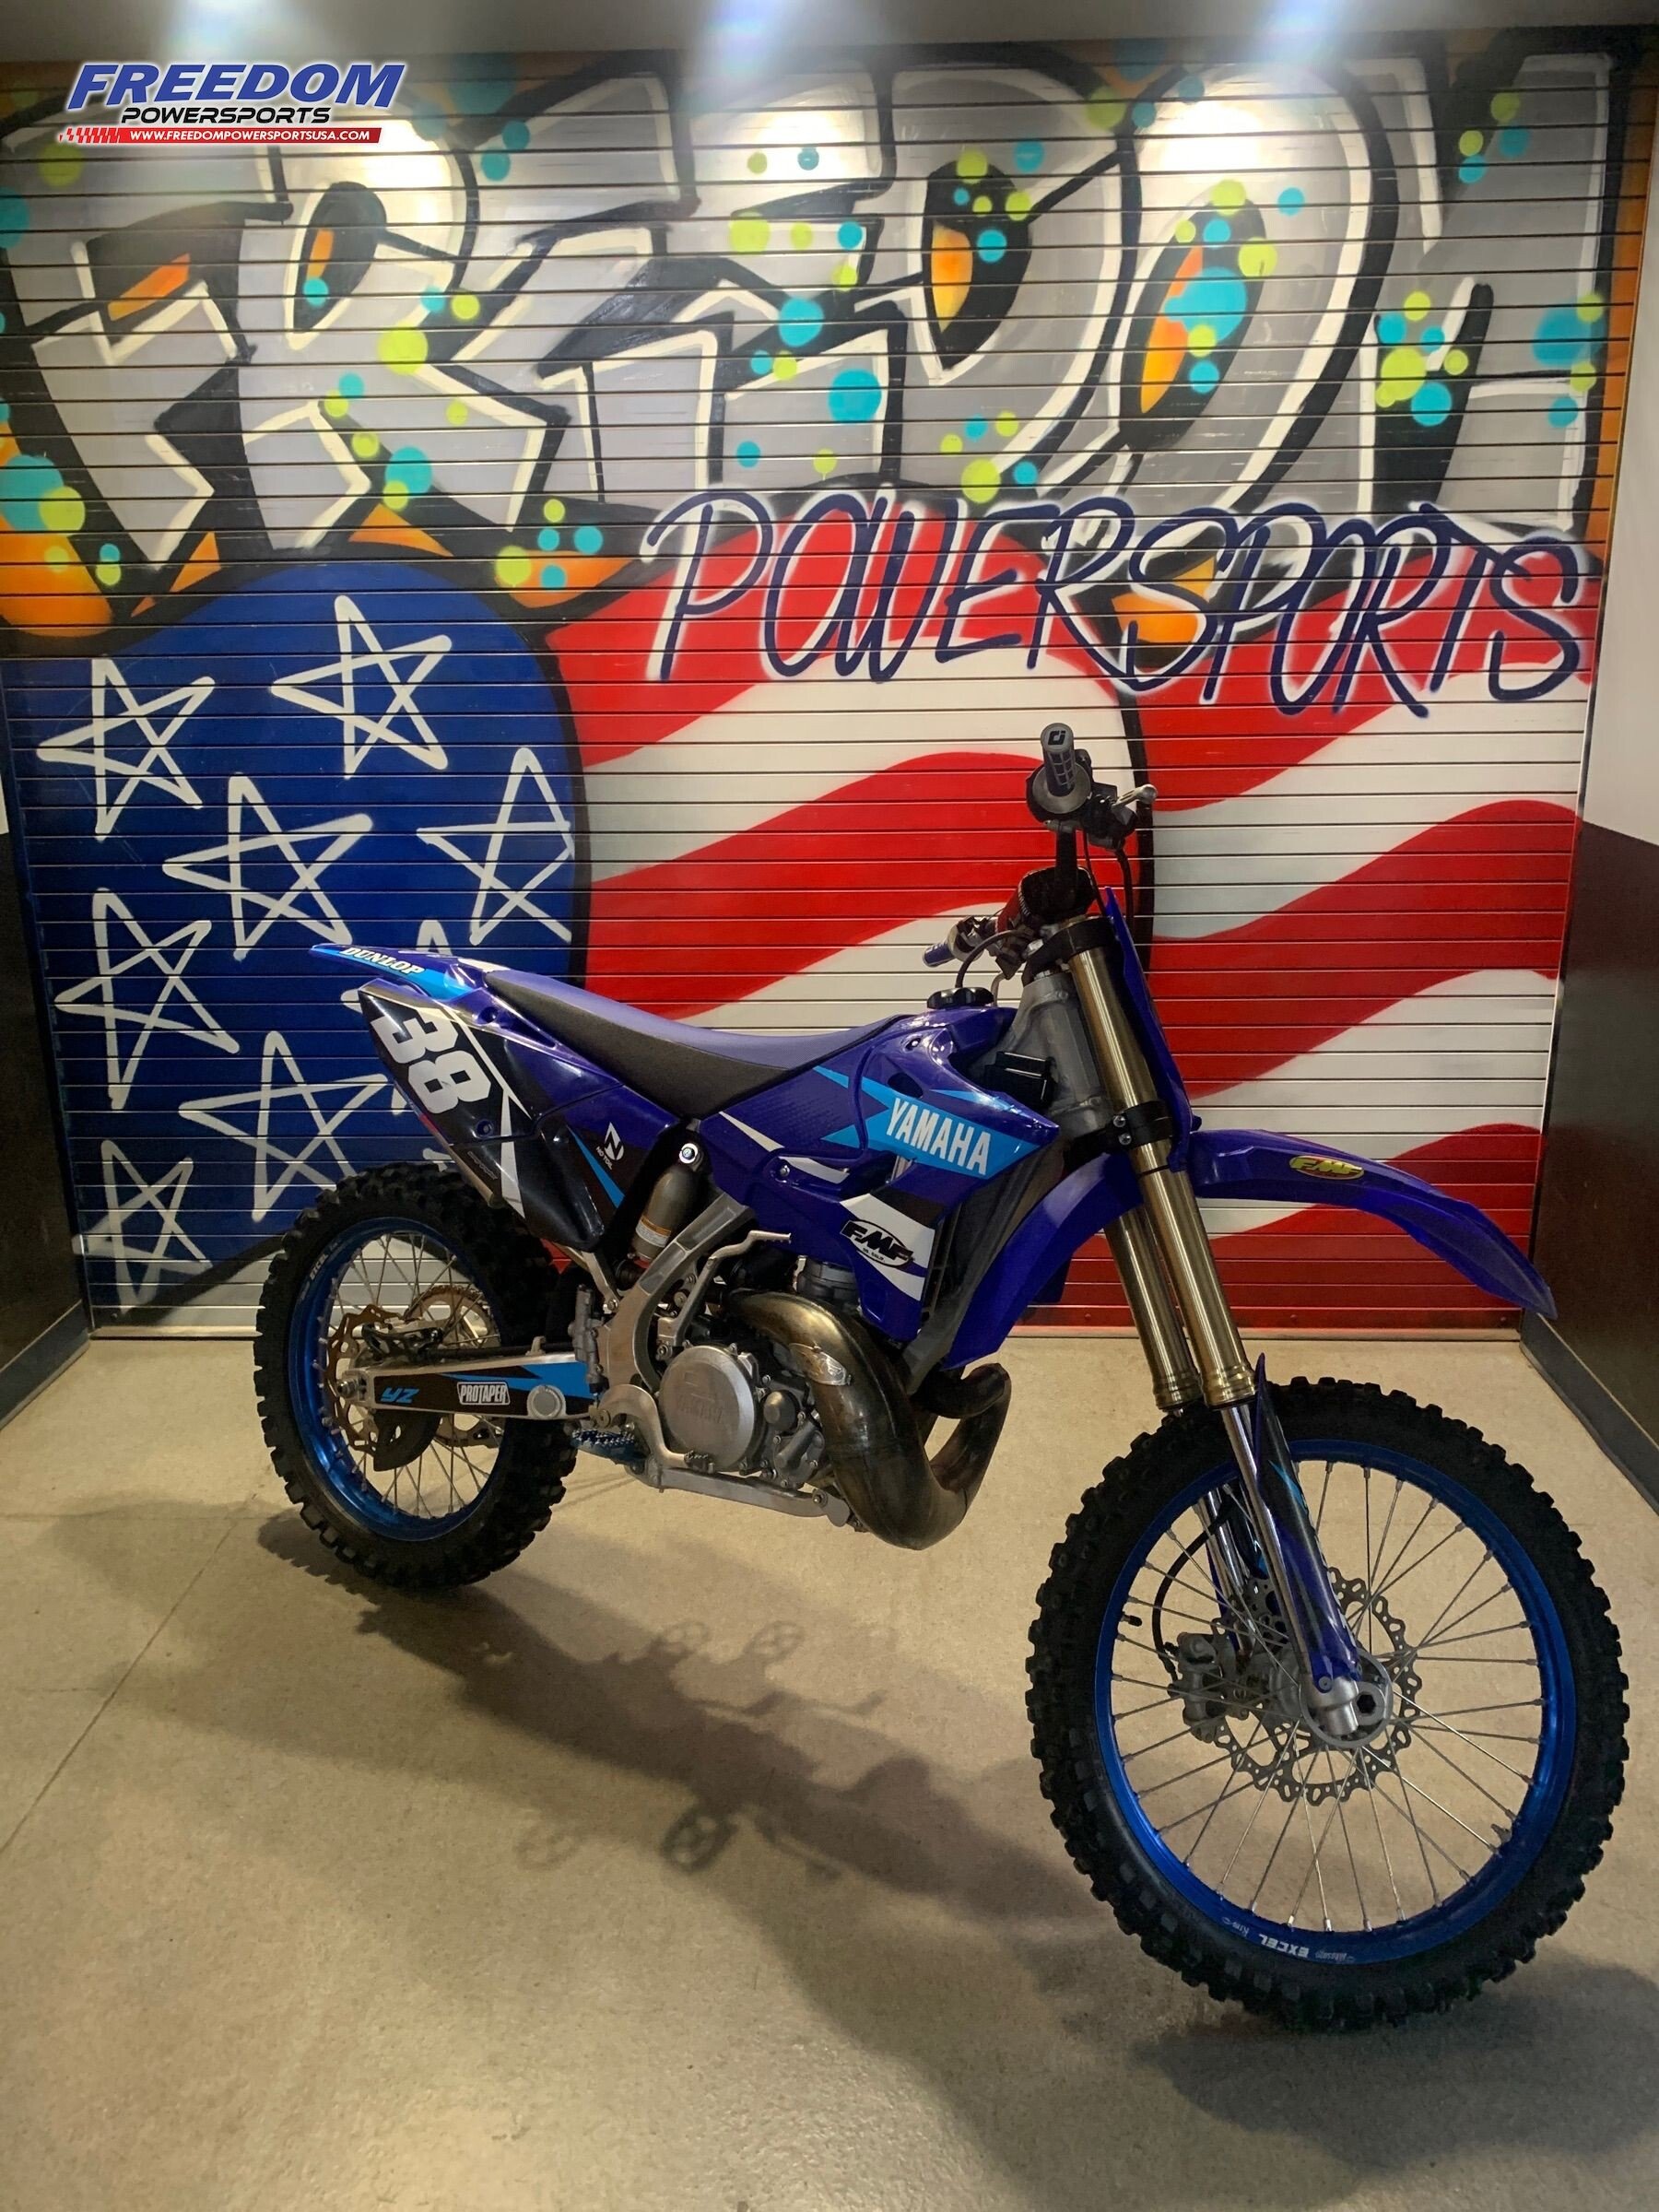 used yz250 for sale near me